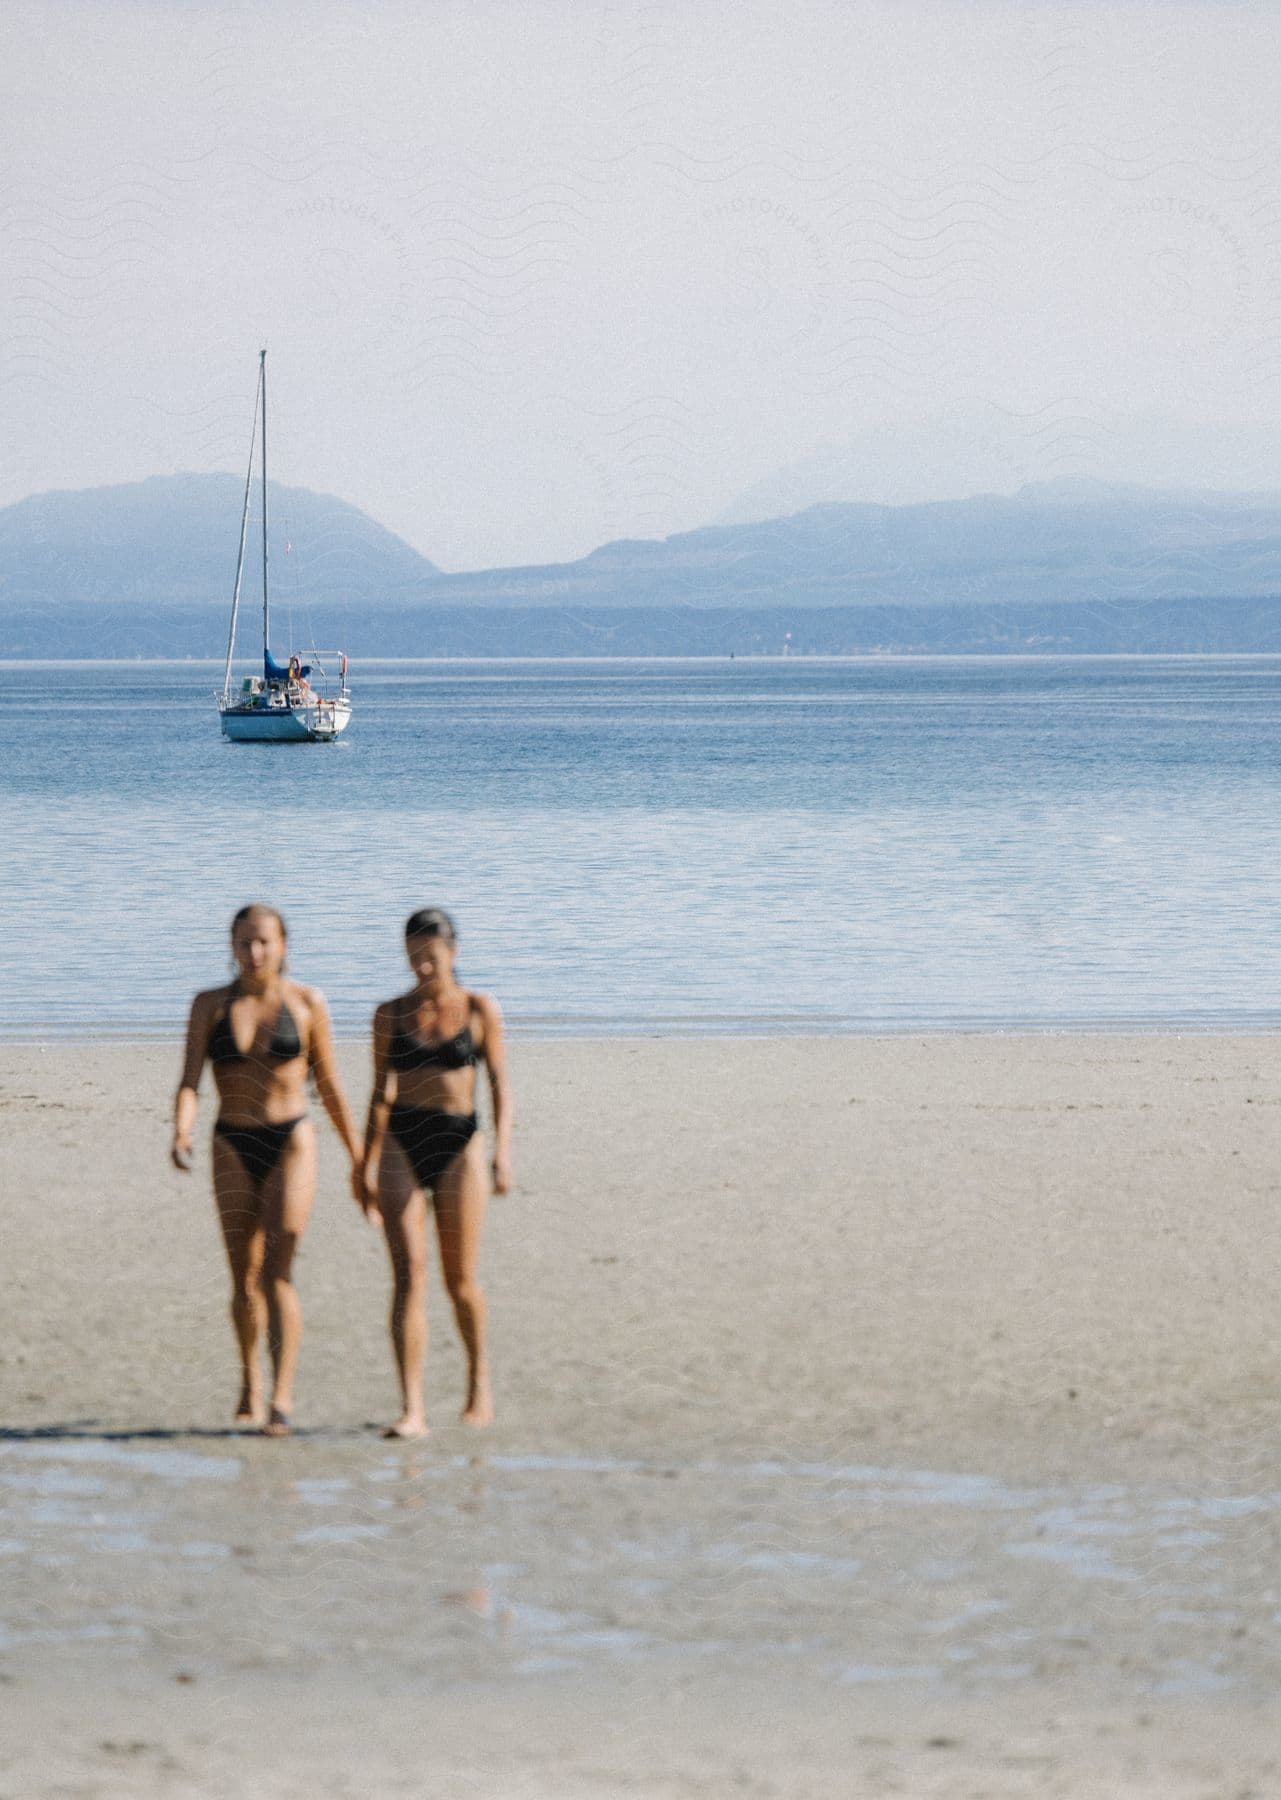 A sailboat floats off the coast while two women in bikinis walk on the beach